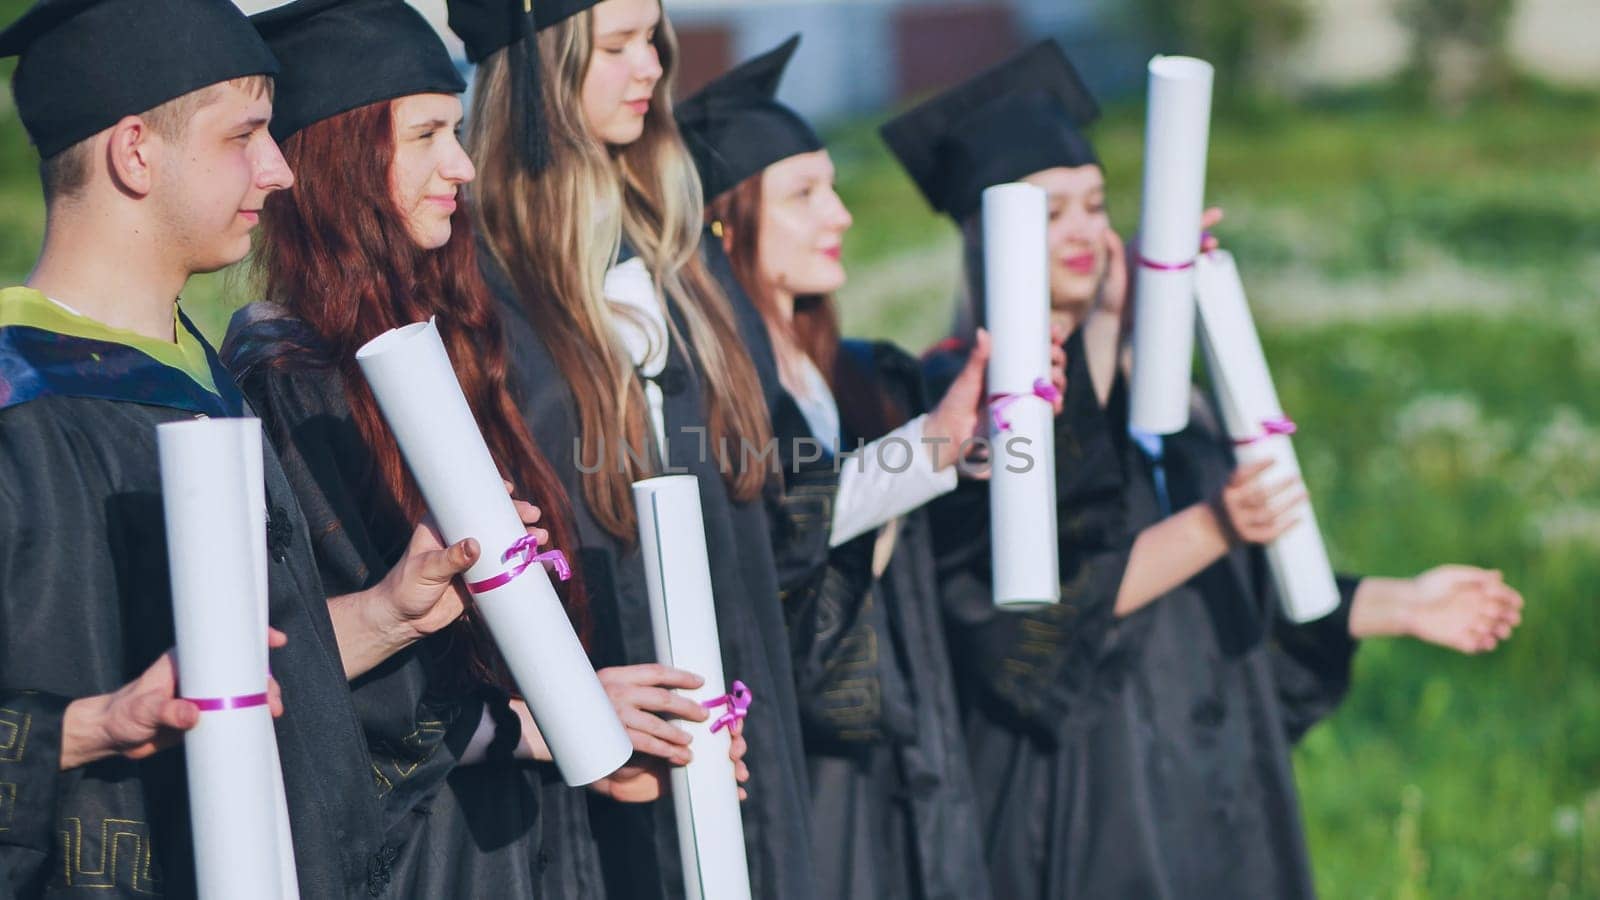 Scrolls of diplomas in the hands of a group of graduates. by DovidPro